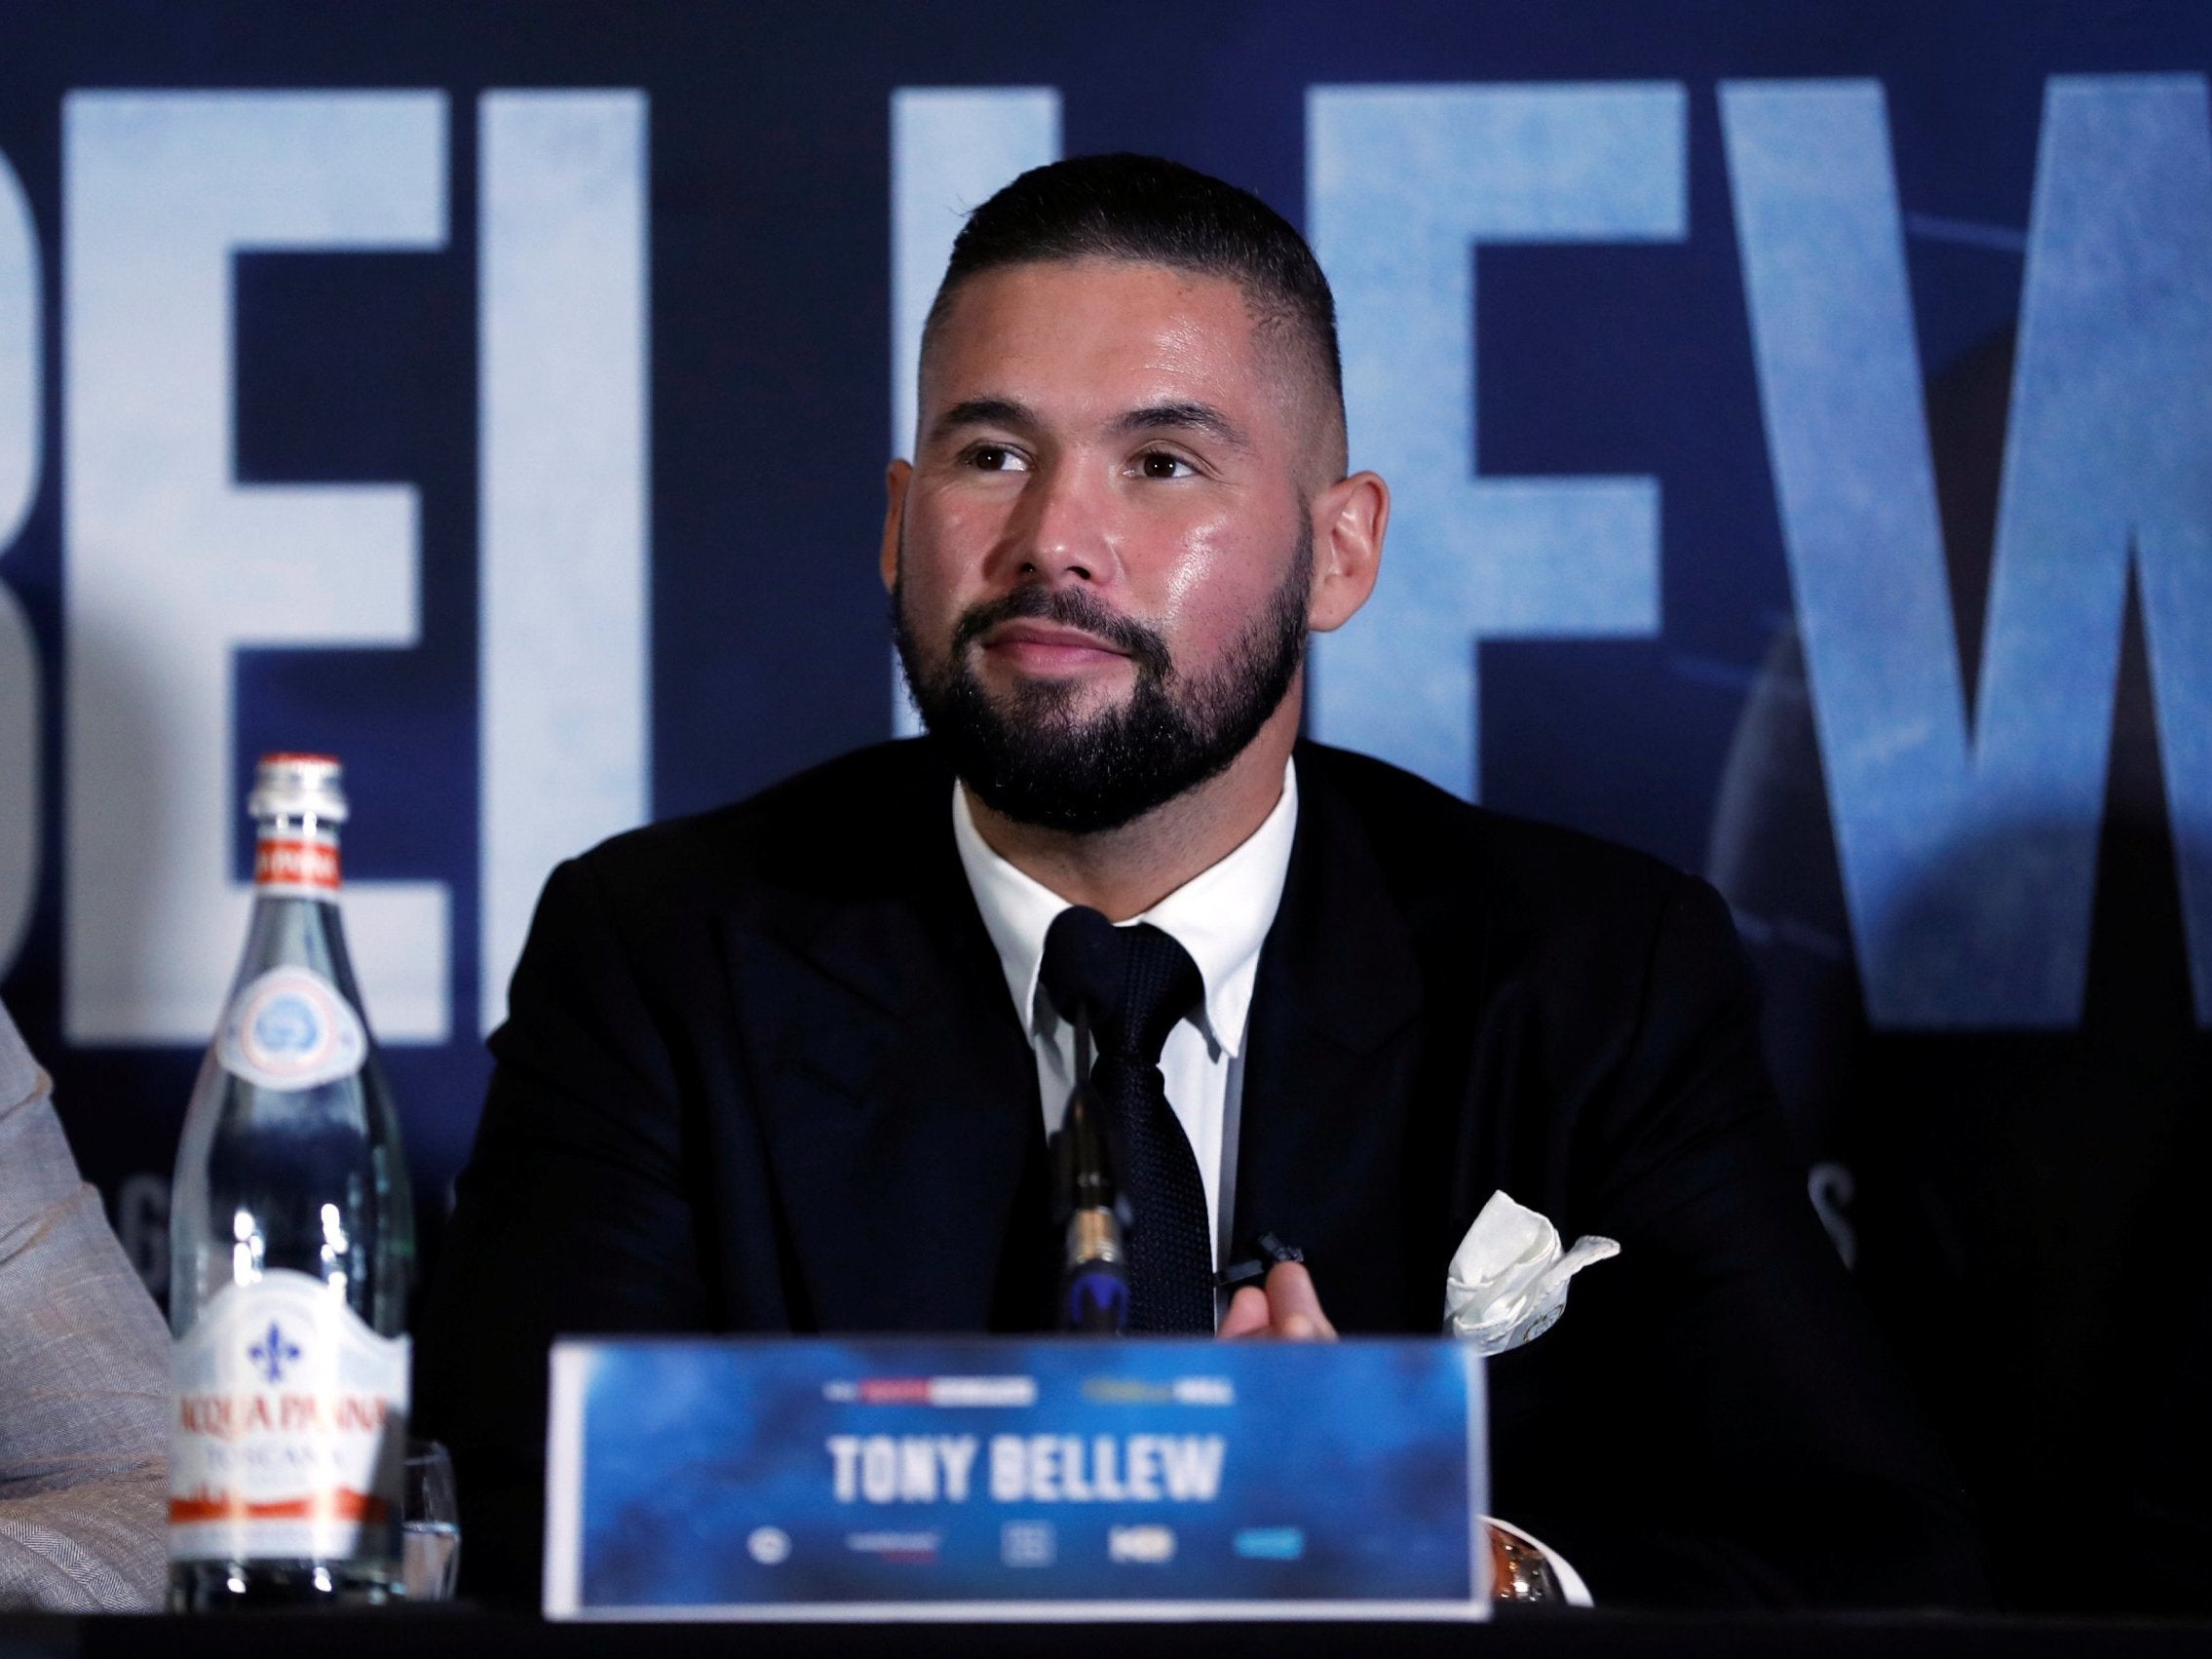 Tony Bellew is happy for more competition testing